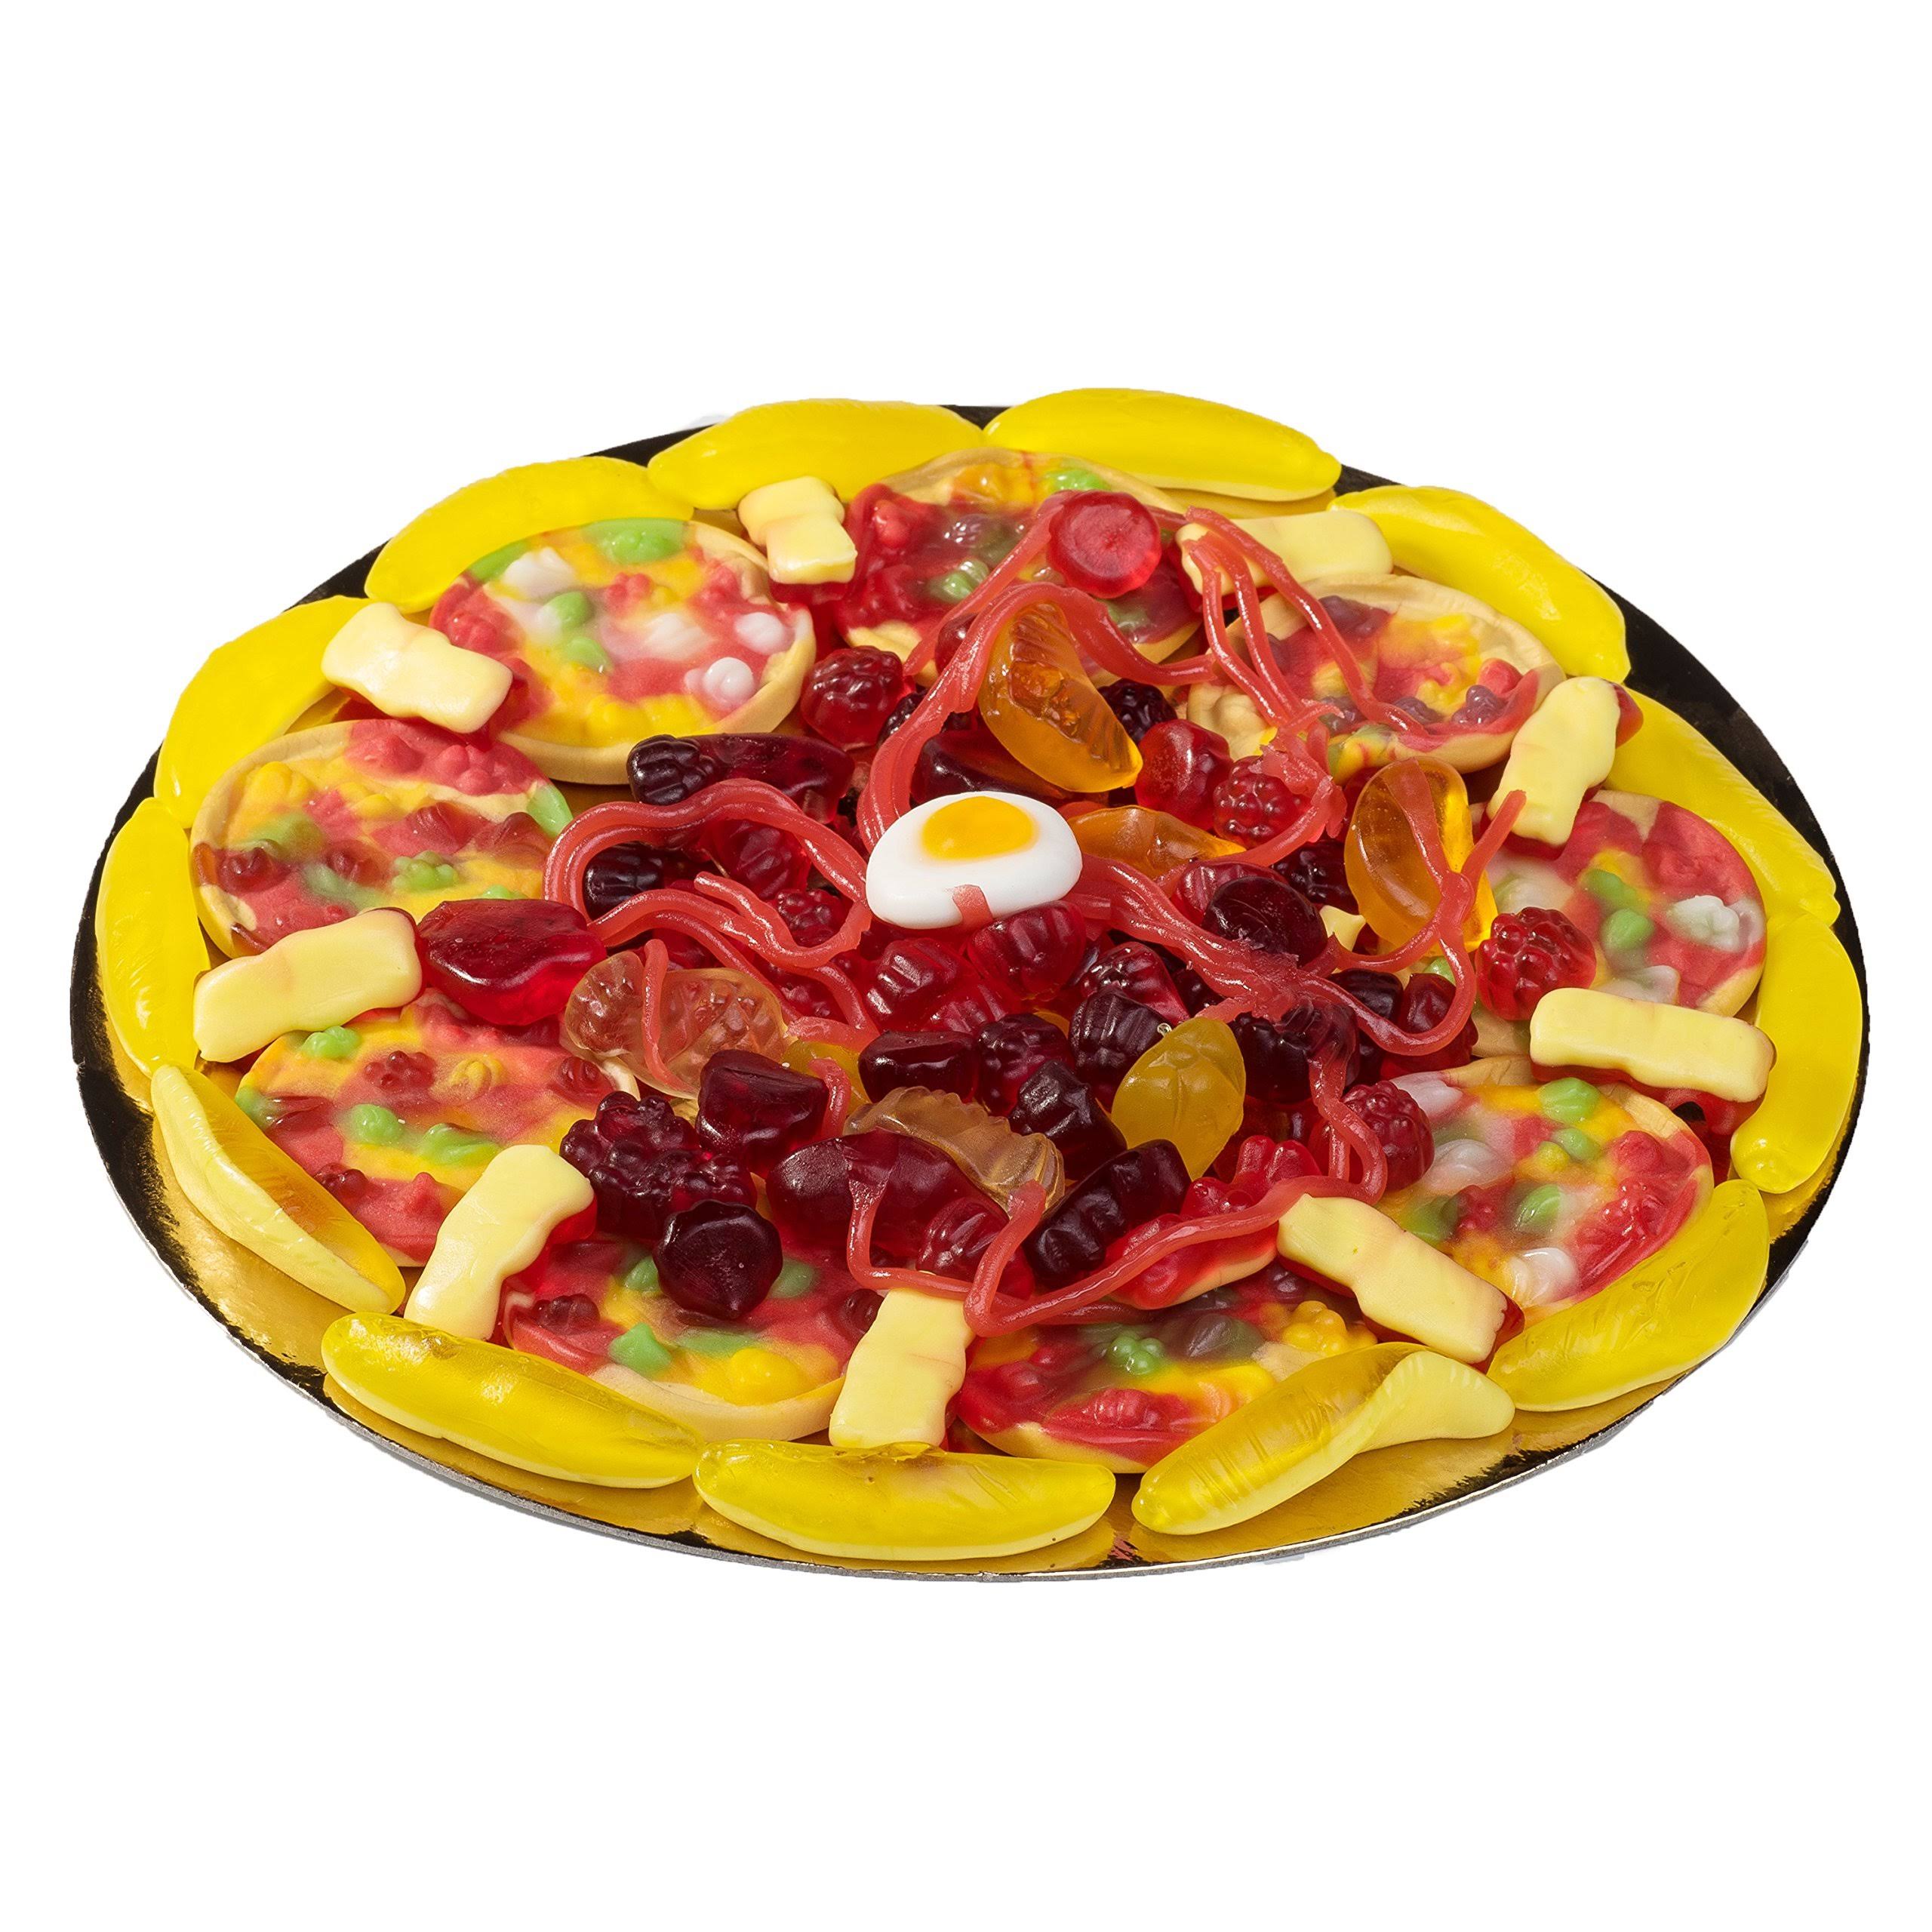 Raindrops Candy Pizza - 435g